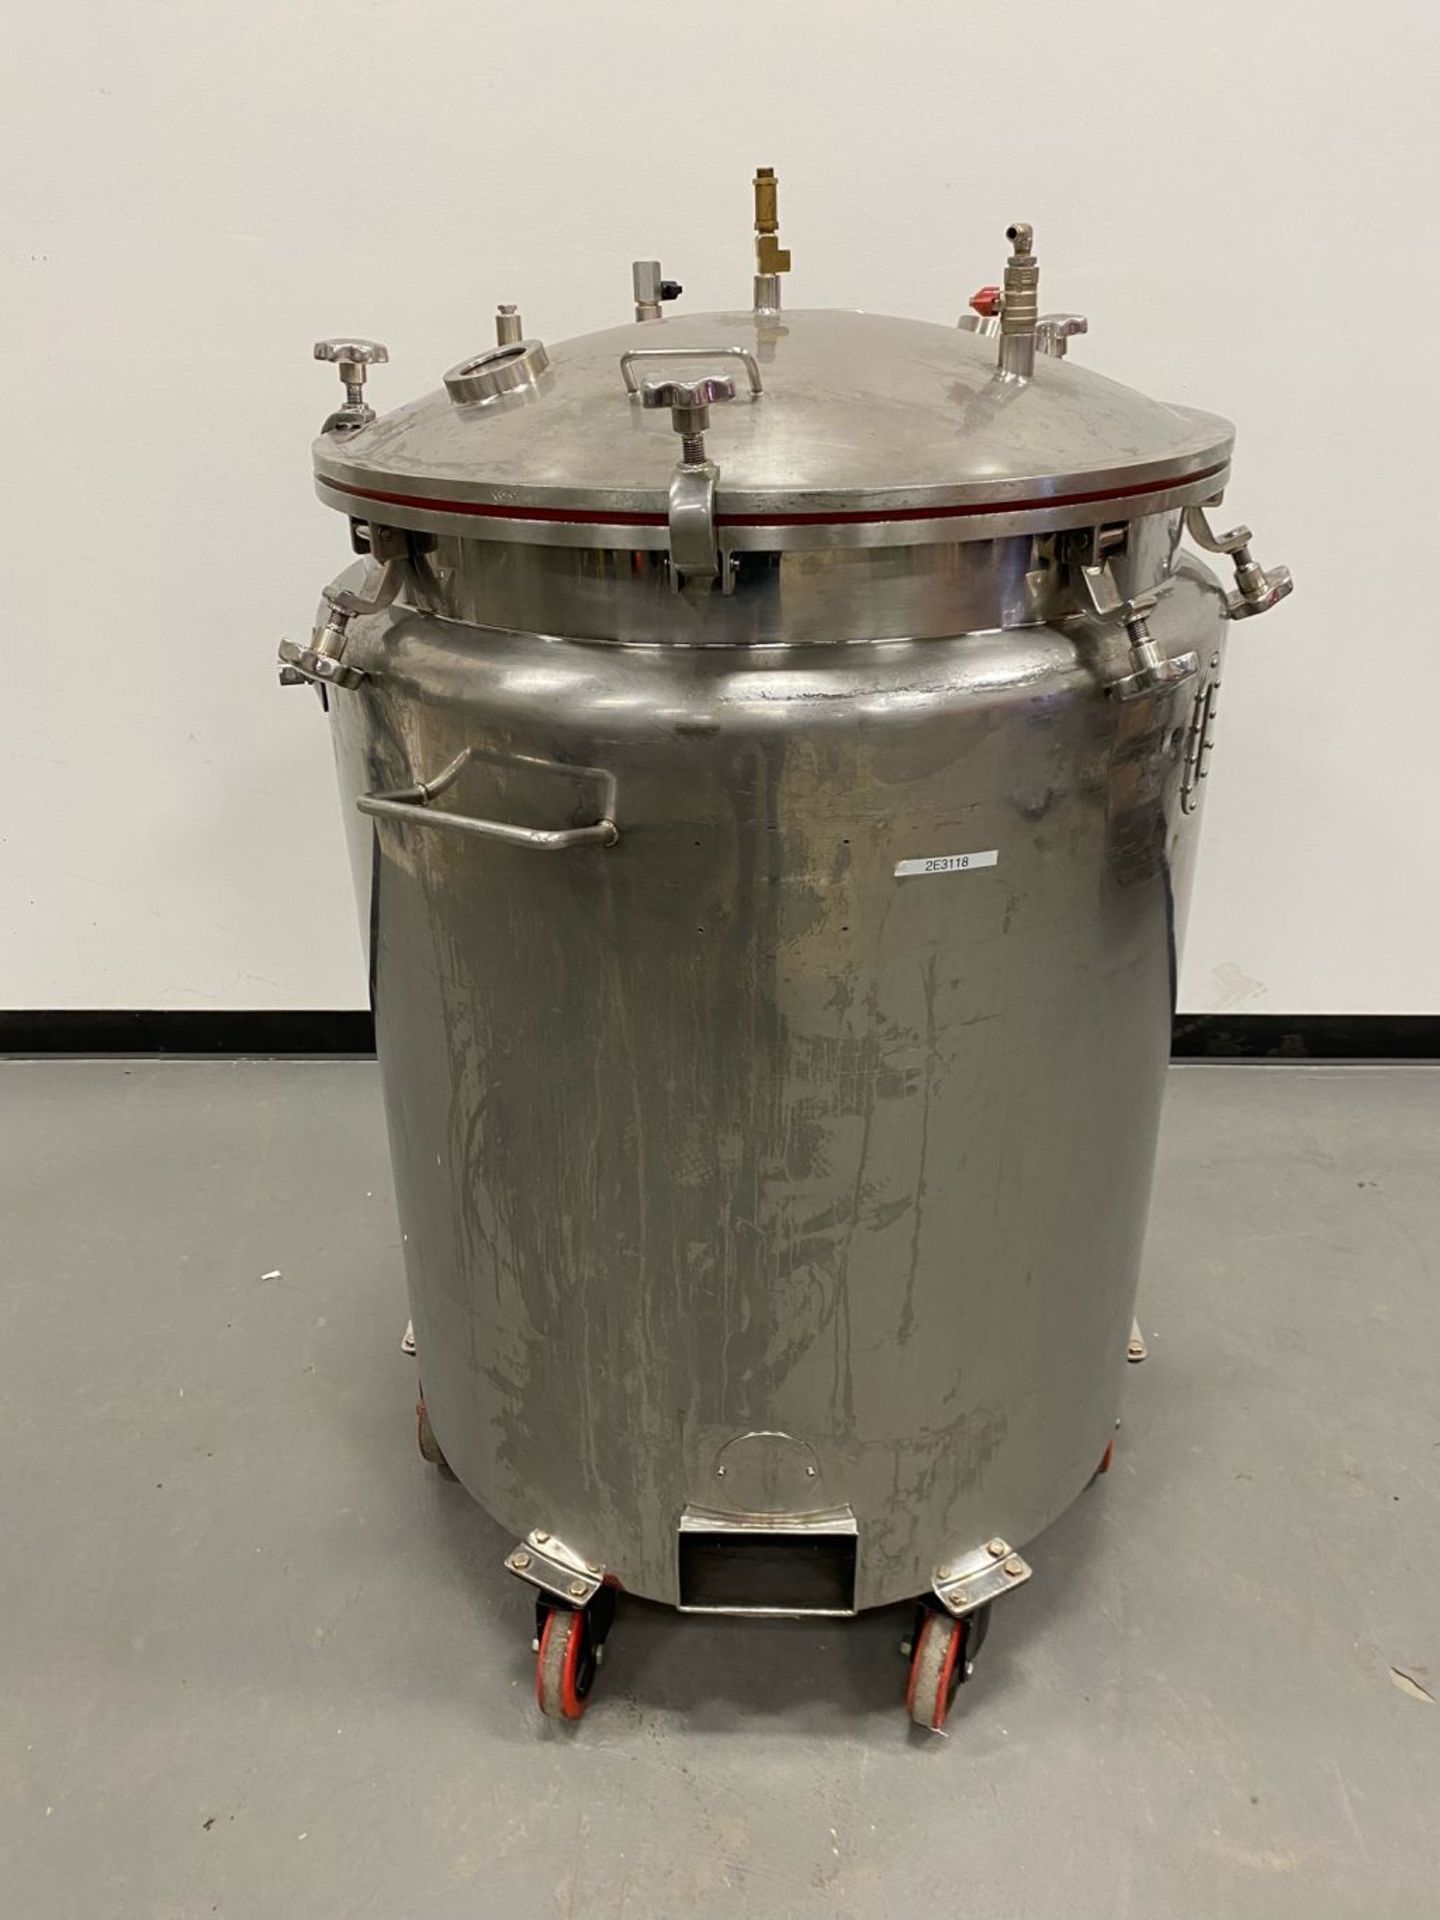 Stainless Steel Tank. 30inch diameter 32 straight wall. On wheels. As shown in photos. No Reserve ( - Image 2 of 2